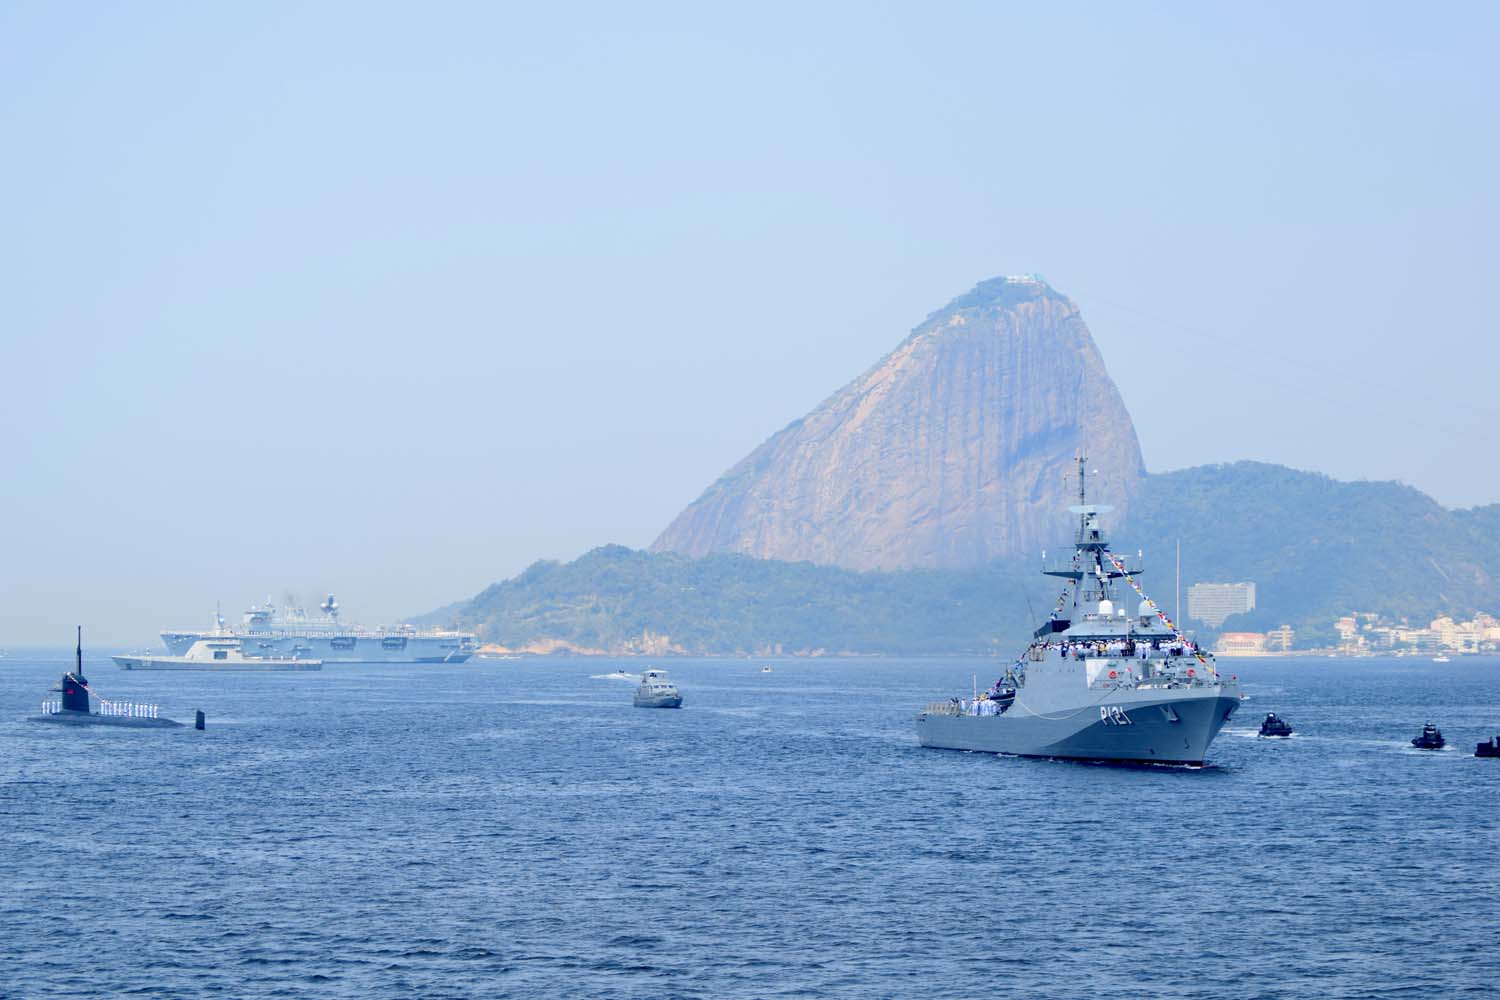 Patrol ship Forth joins allies in exercises off Rio